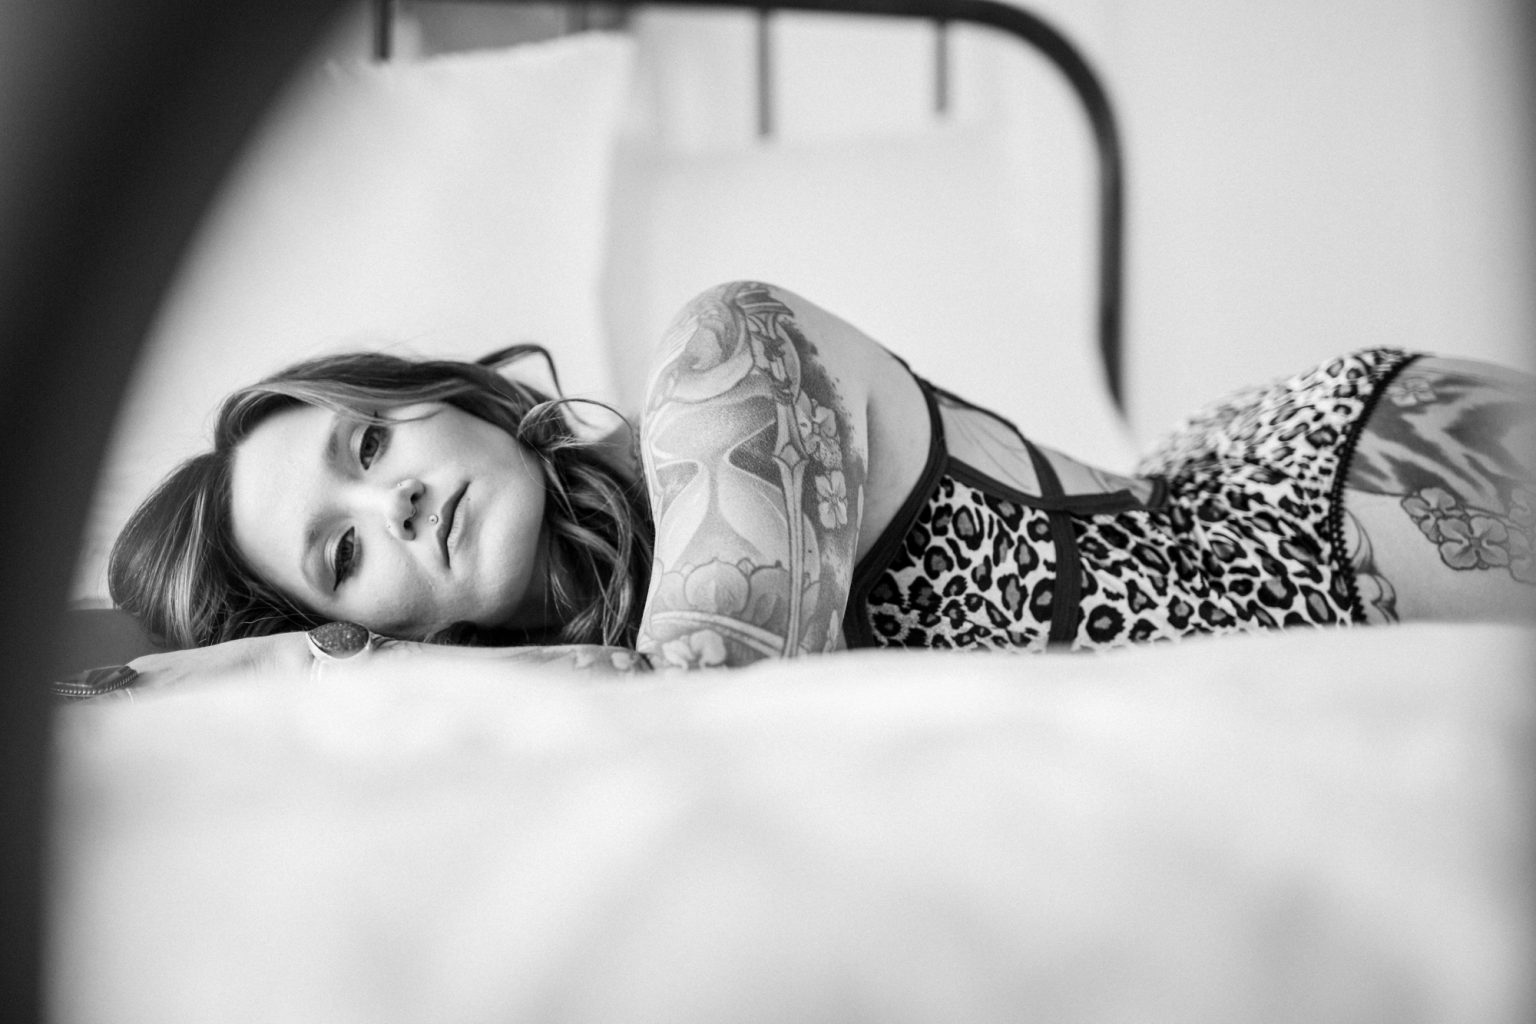 https://lilacandfernphotography.com/wp-content/uploads/2022/03/Boudoir-Fort-Collins-Colorado-Lilac-and-Fern-LS-17-1536x1024.jpg